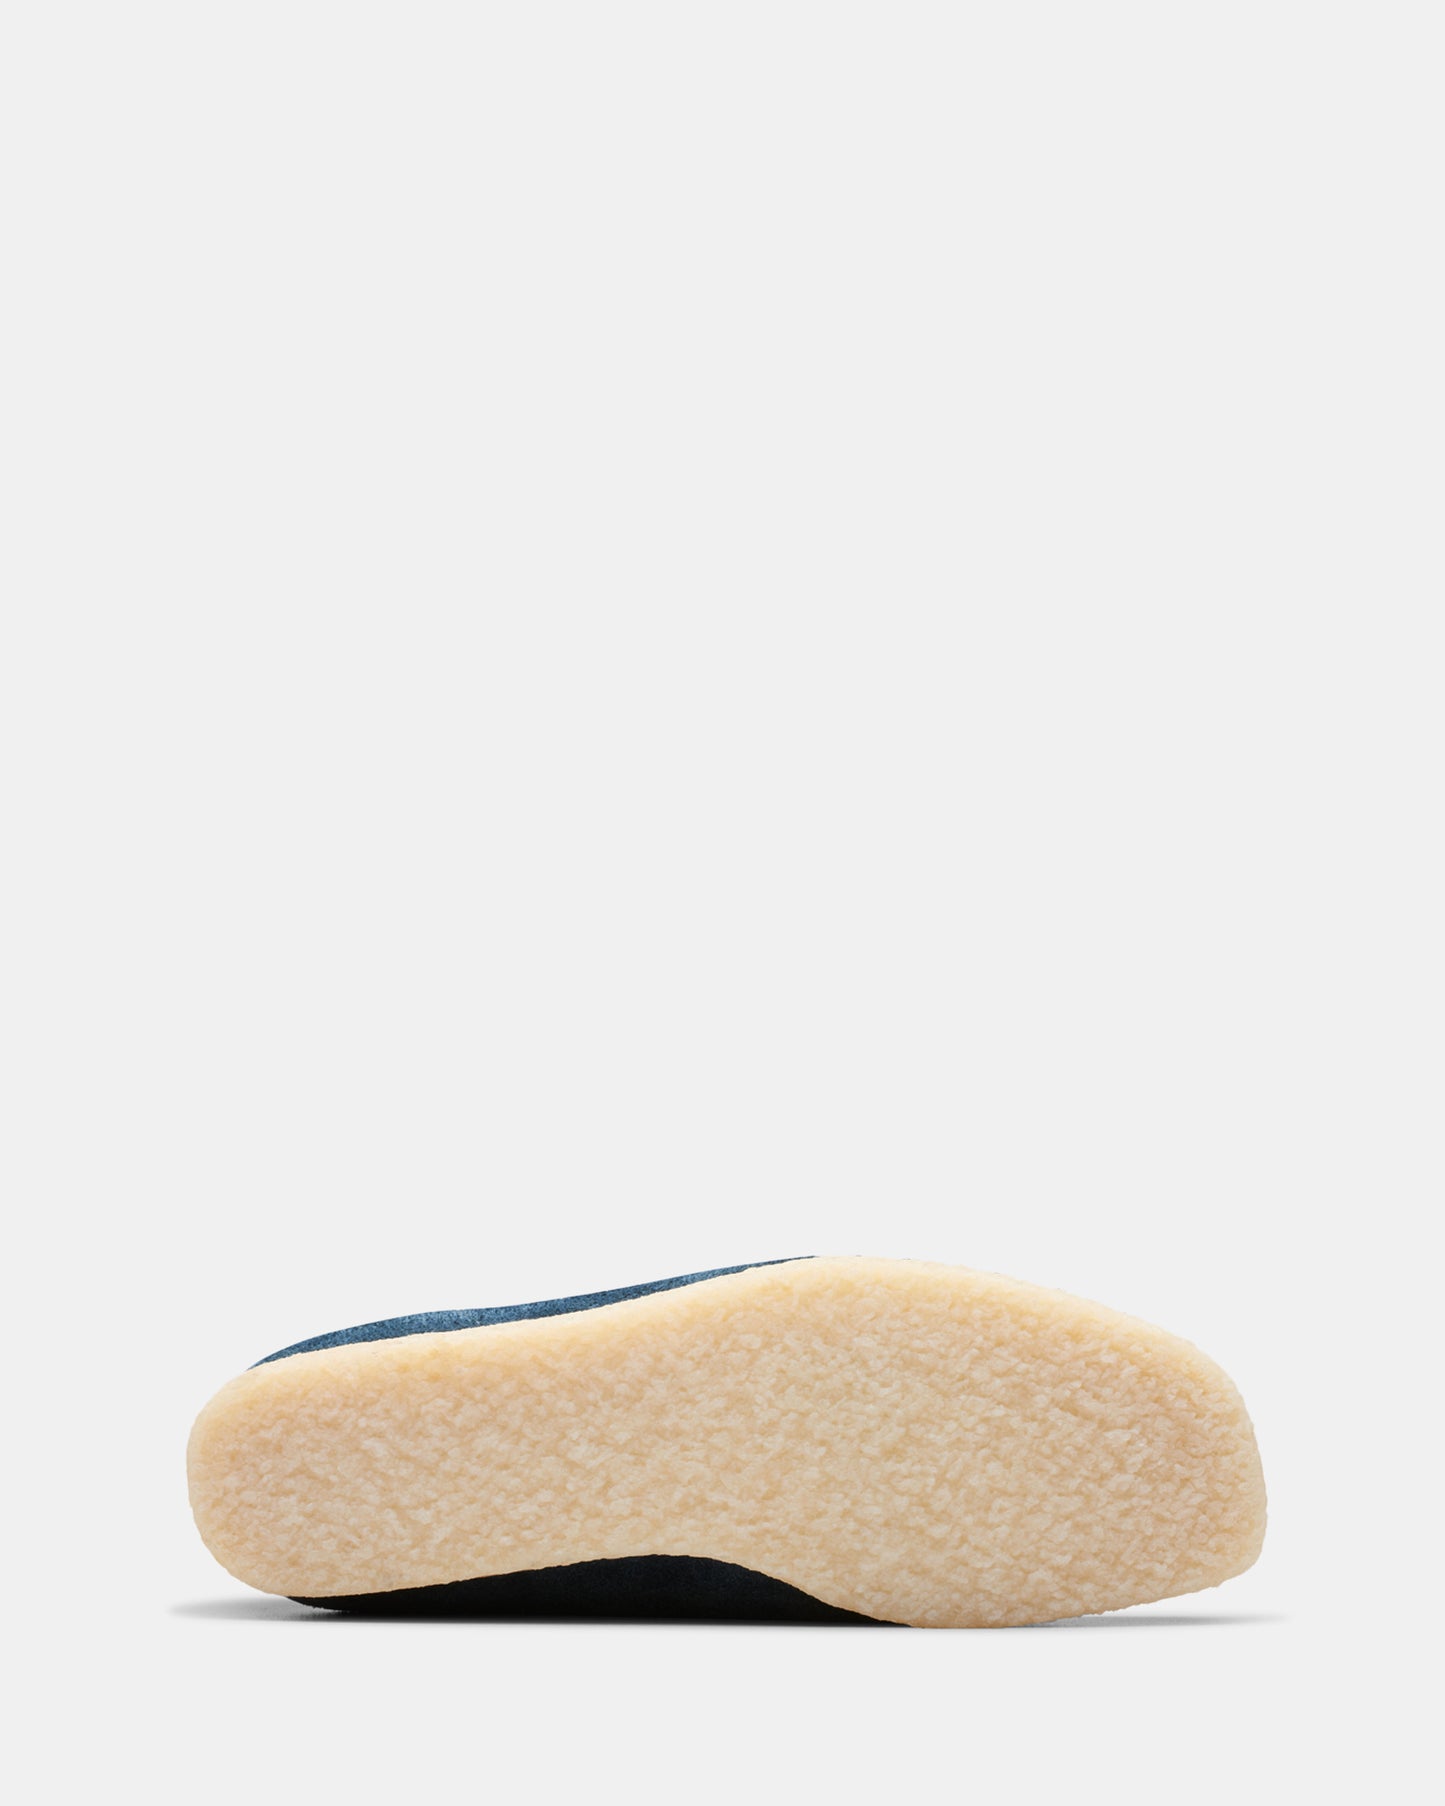 Wallabee (M) Navy/Teal Suede